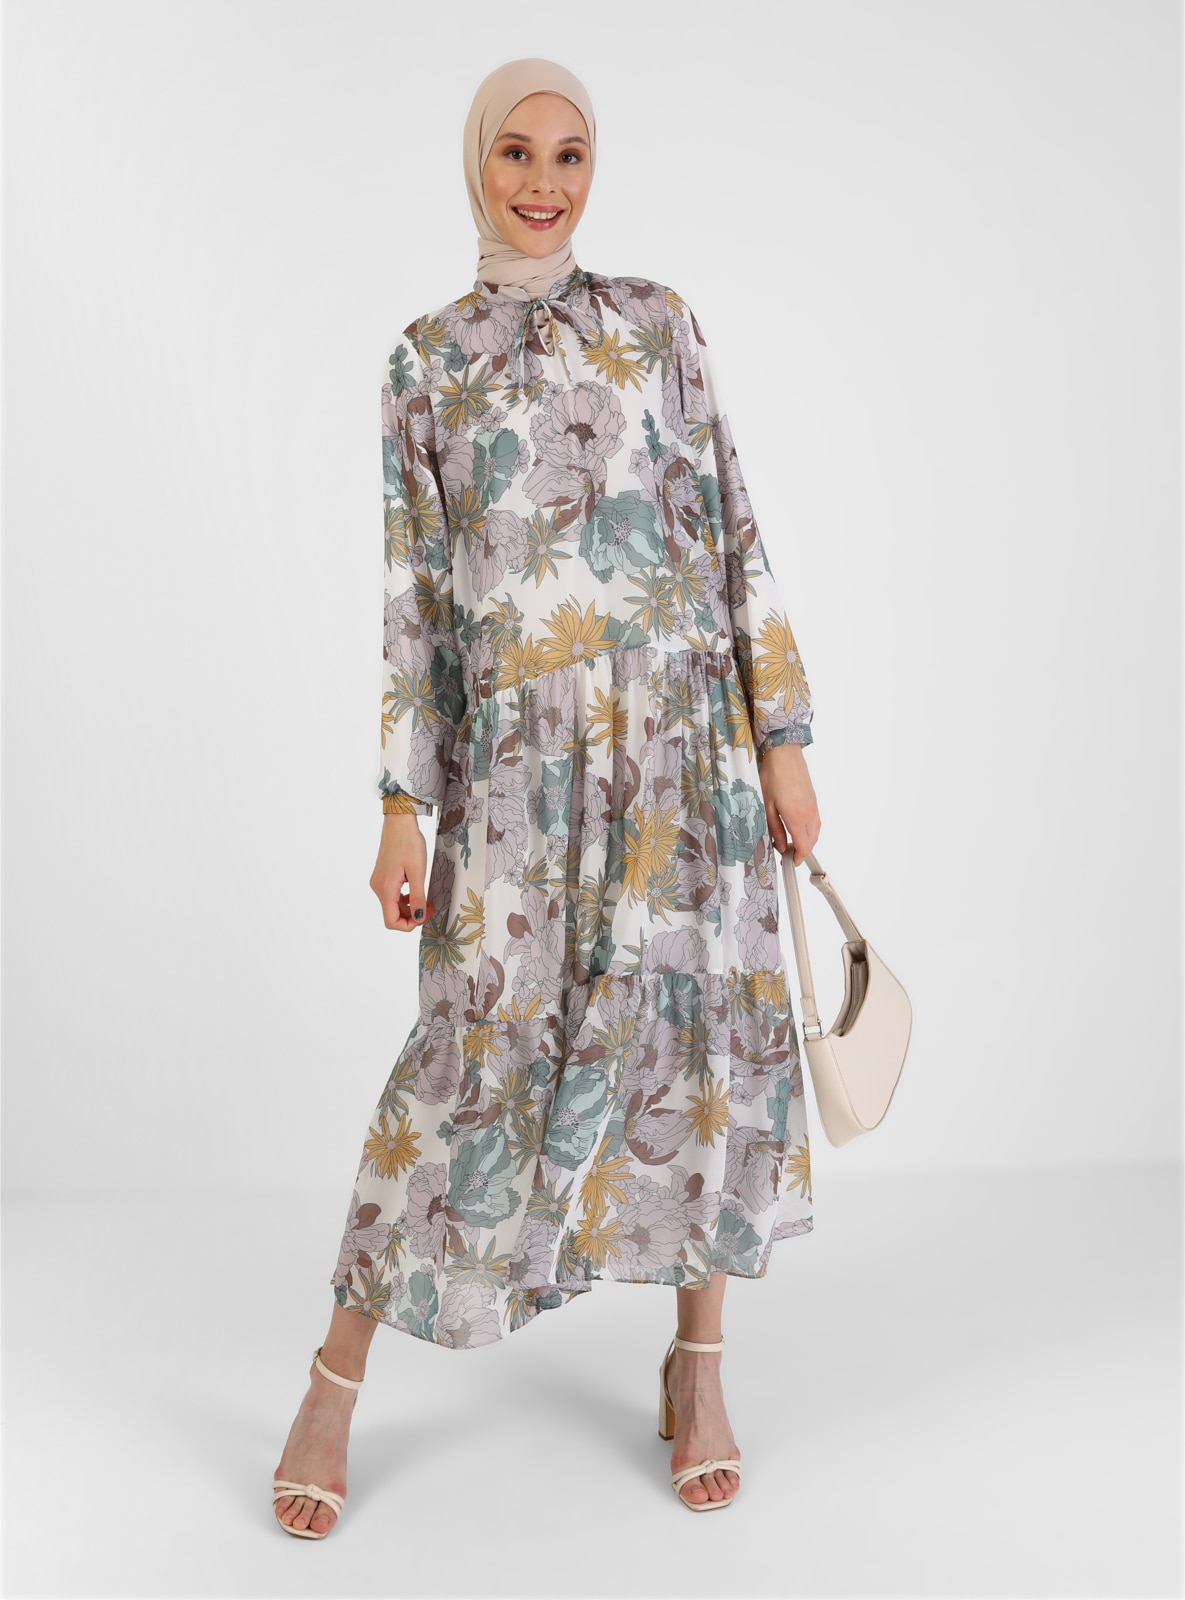 Mustard - Green - Floral - Crew neck - Fully Lined - Modest Dress